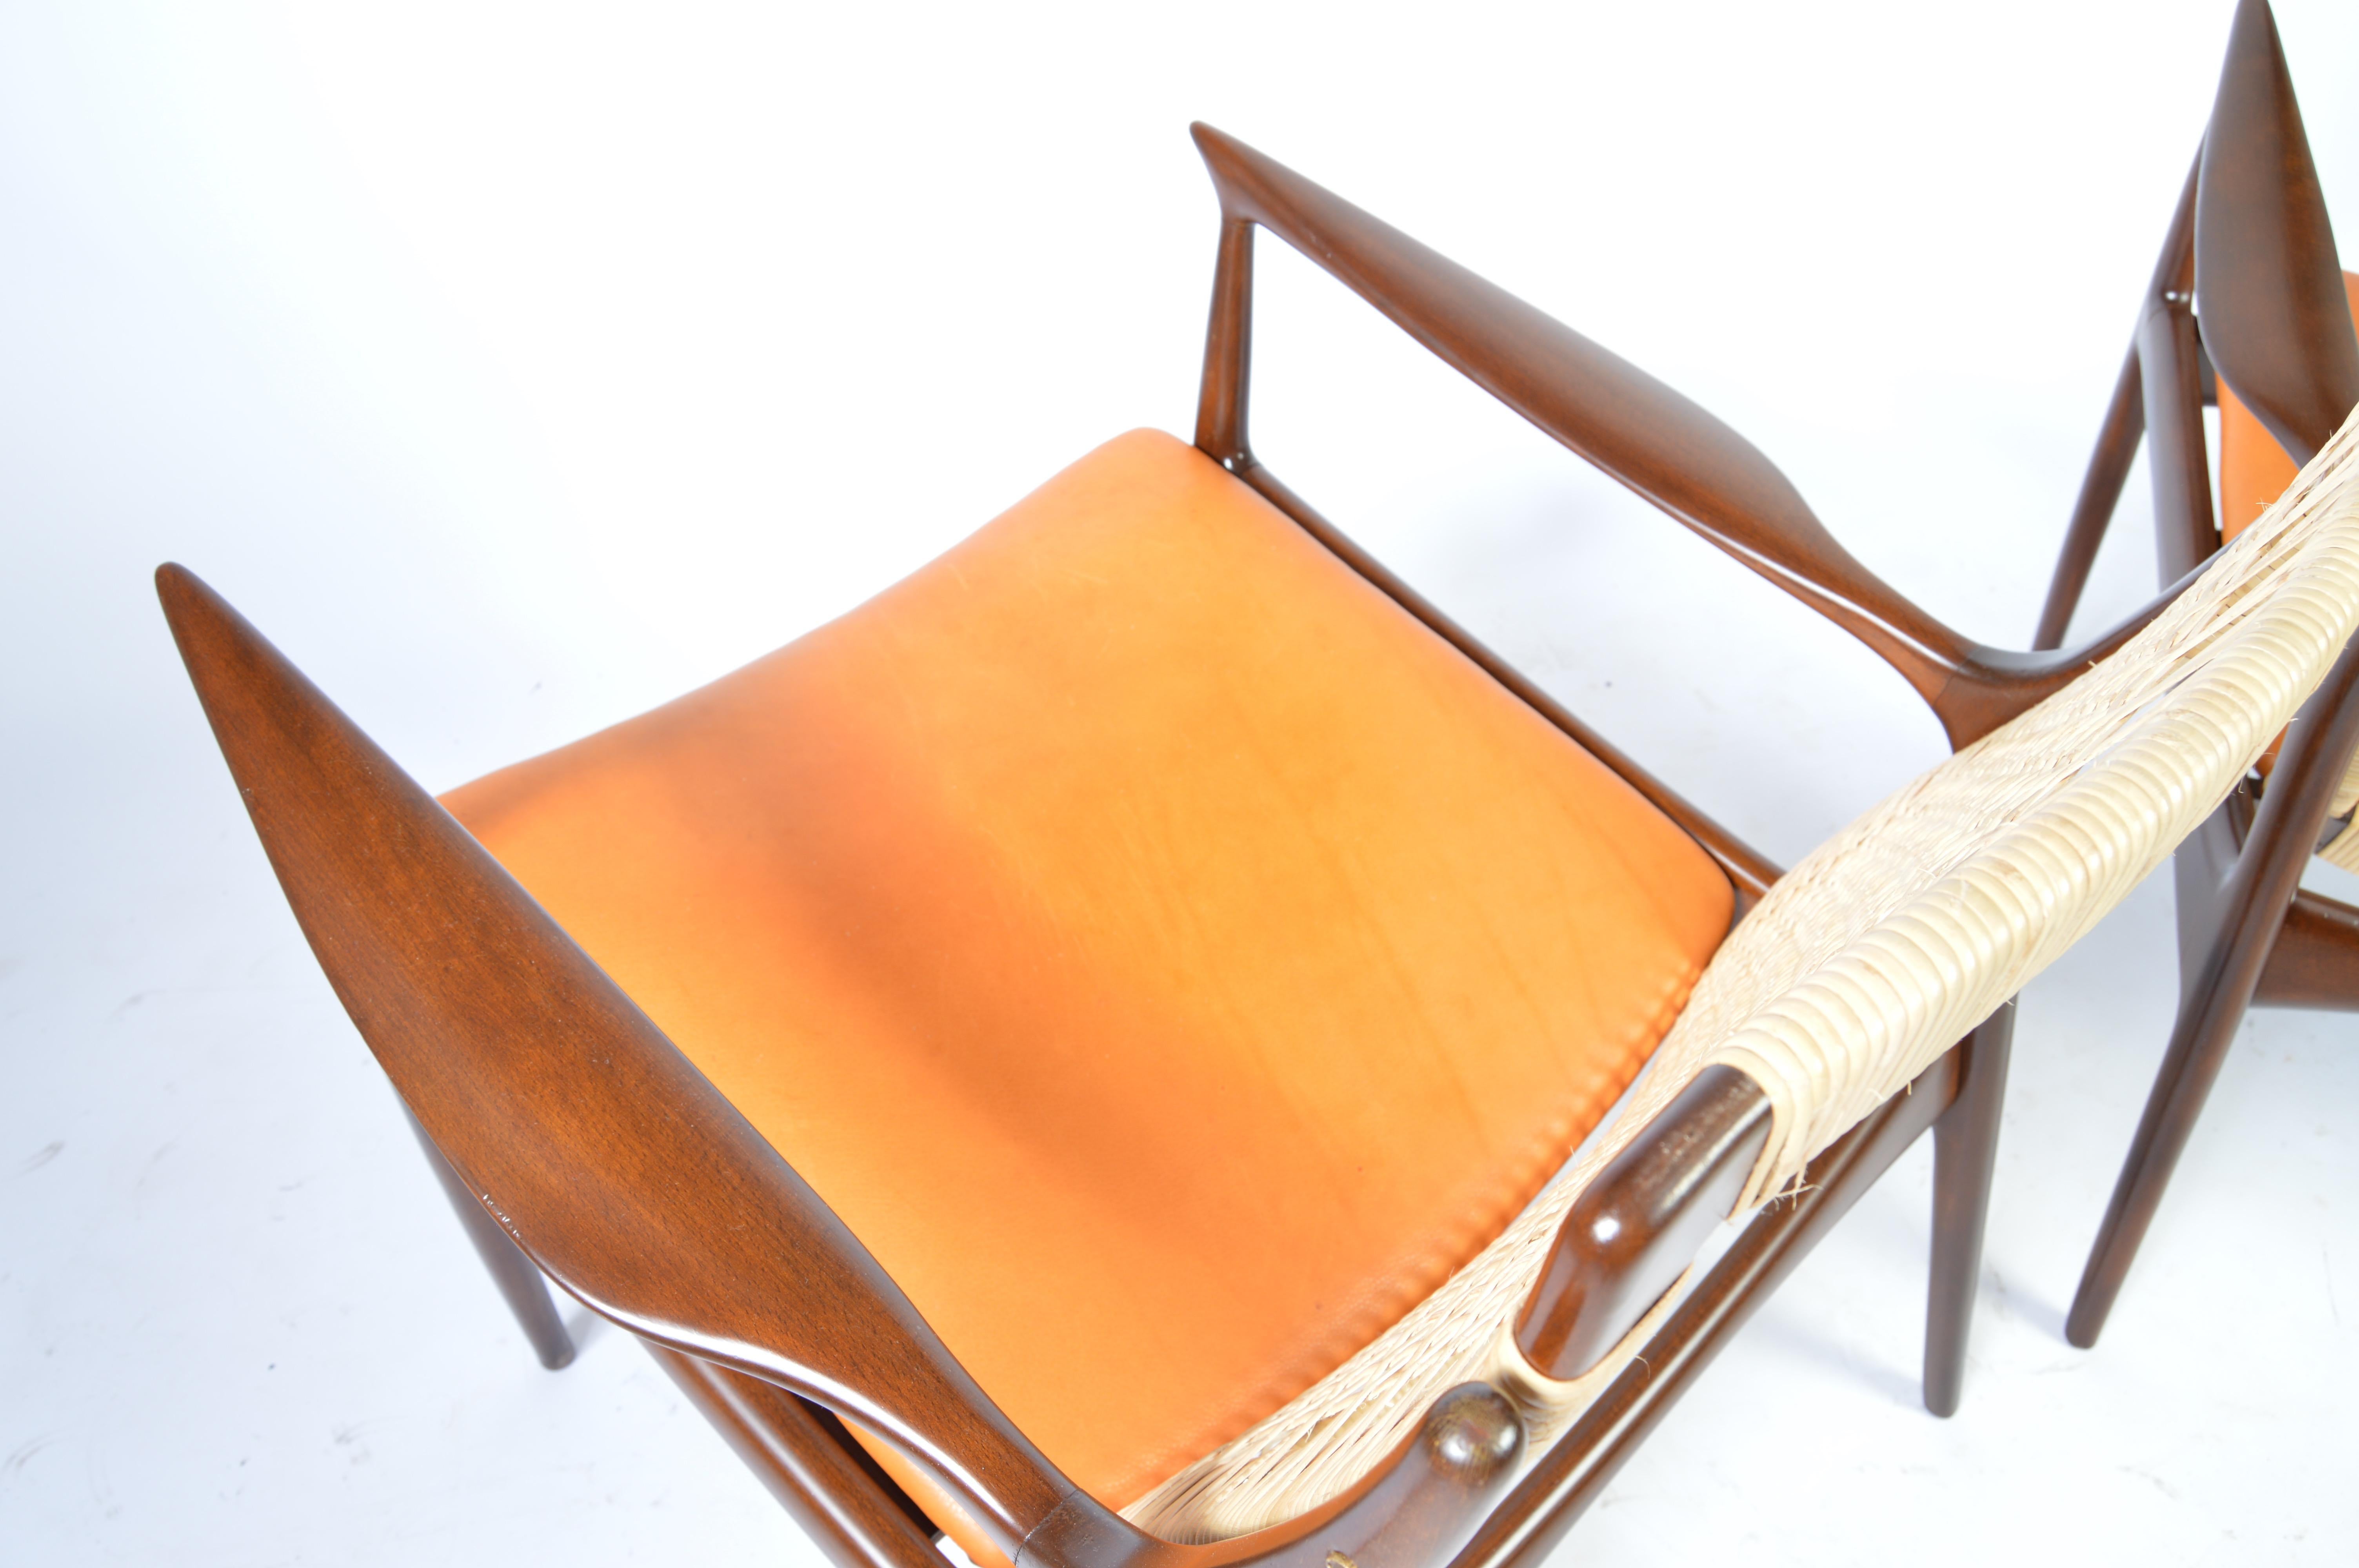 Mahogany IB Kofod Larsen Cane Back Easy Chairs in Vegetable Dyed Leather